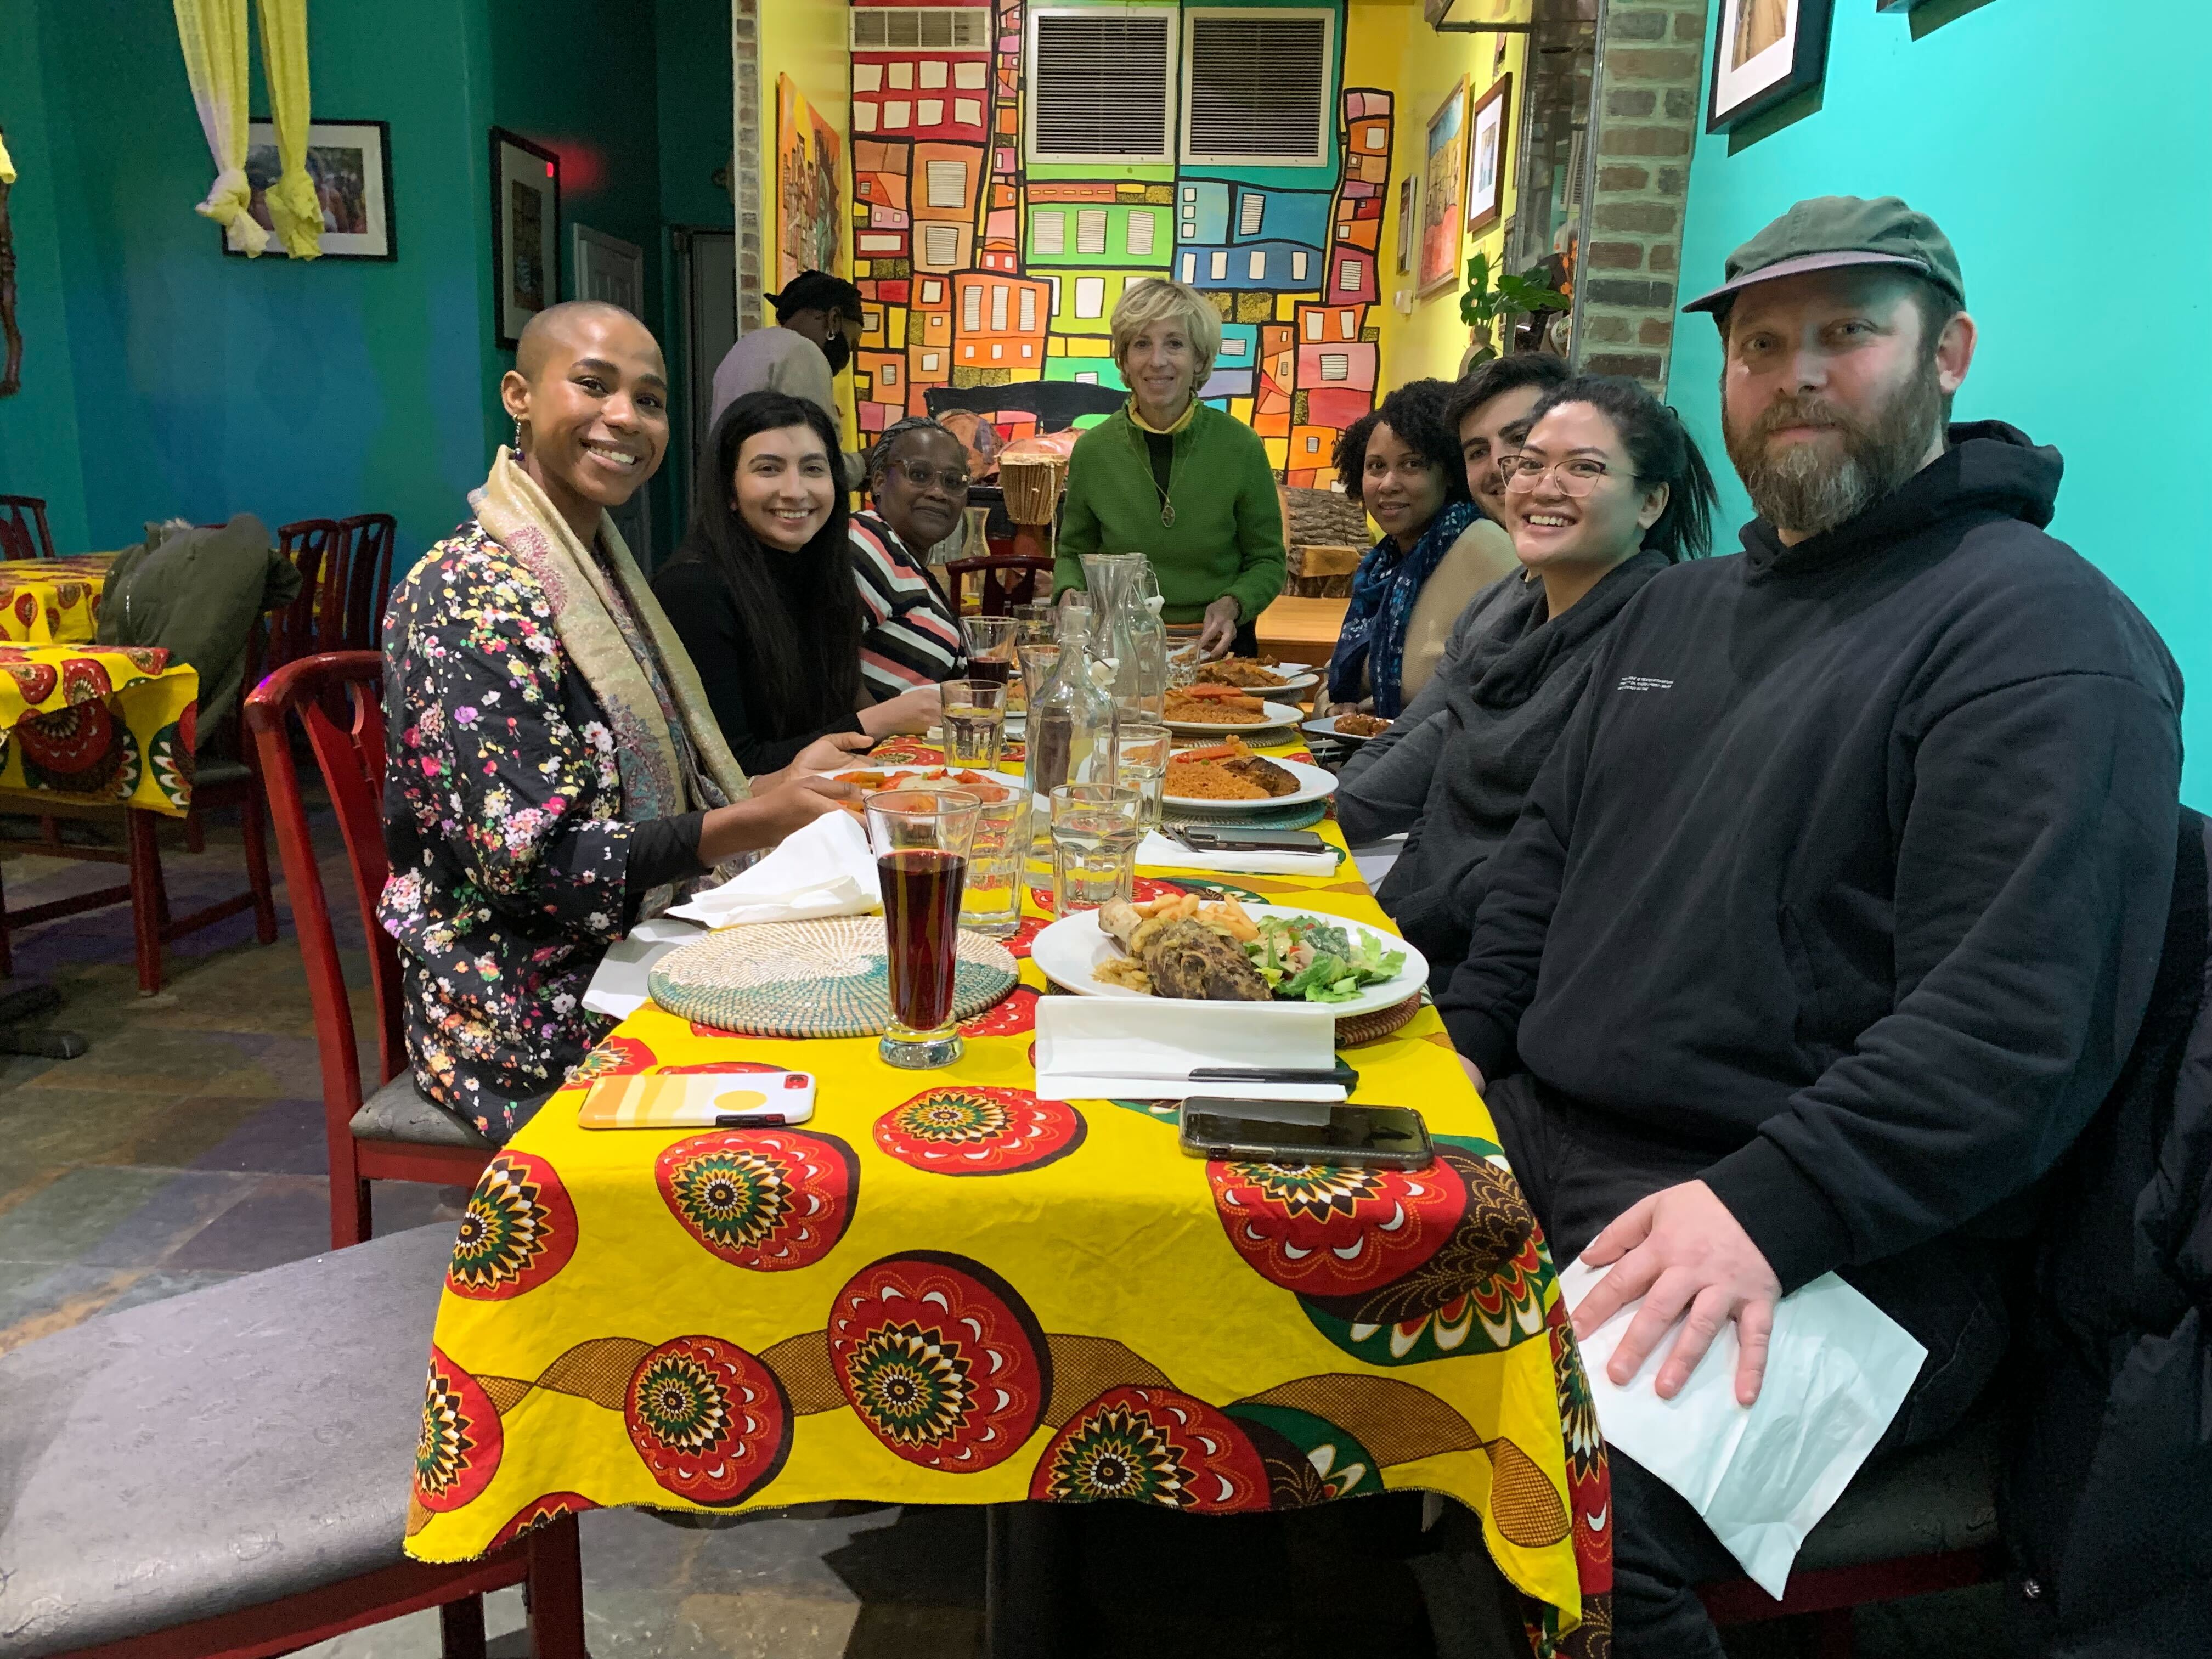 US staff enjoying dinner at a Senegalese restaurant after a team museum outing.